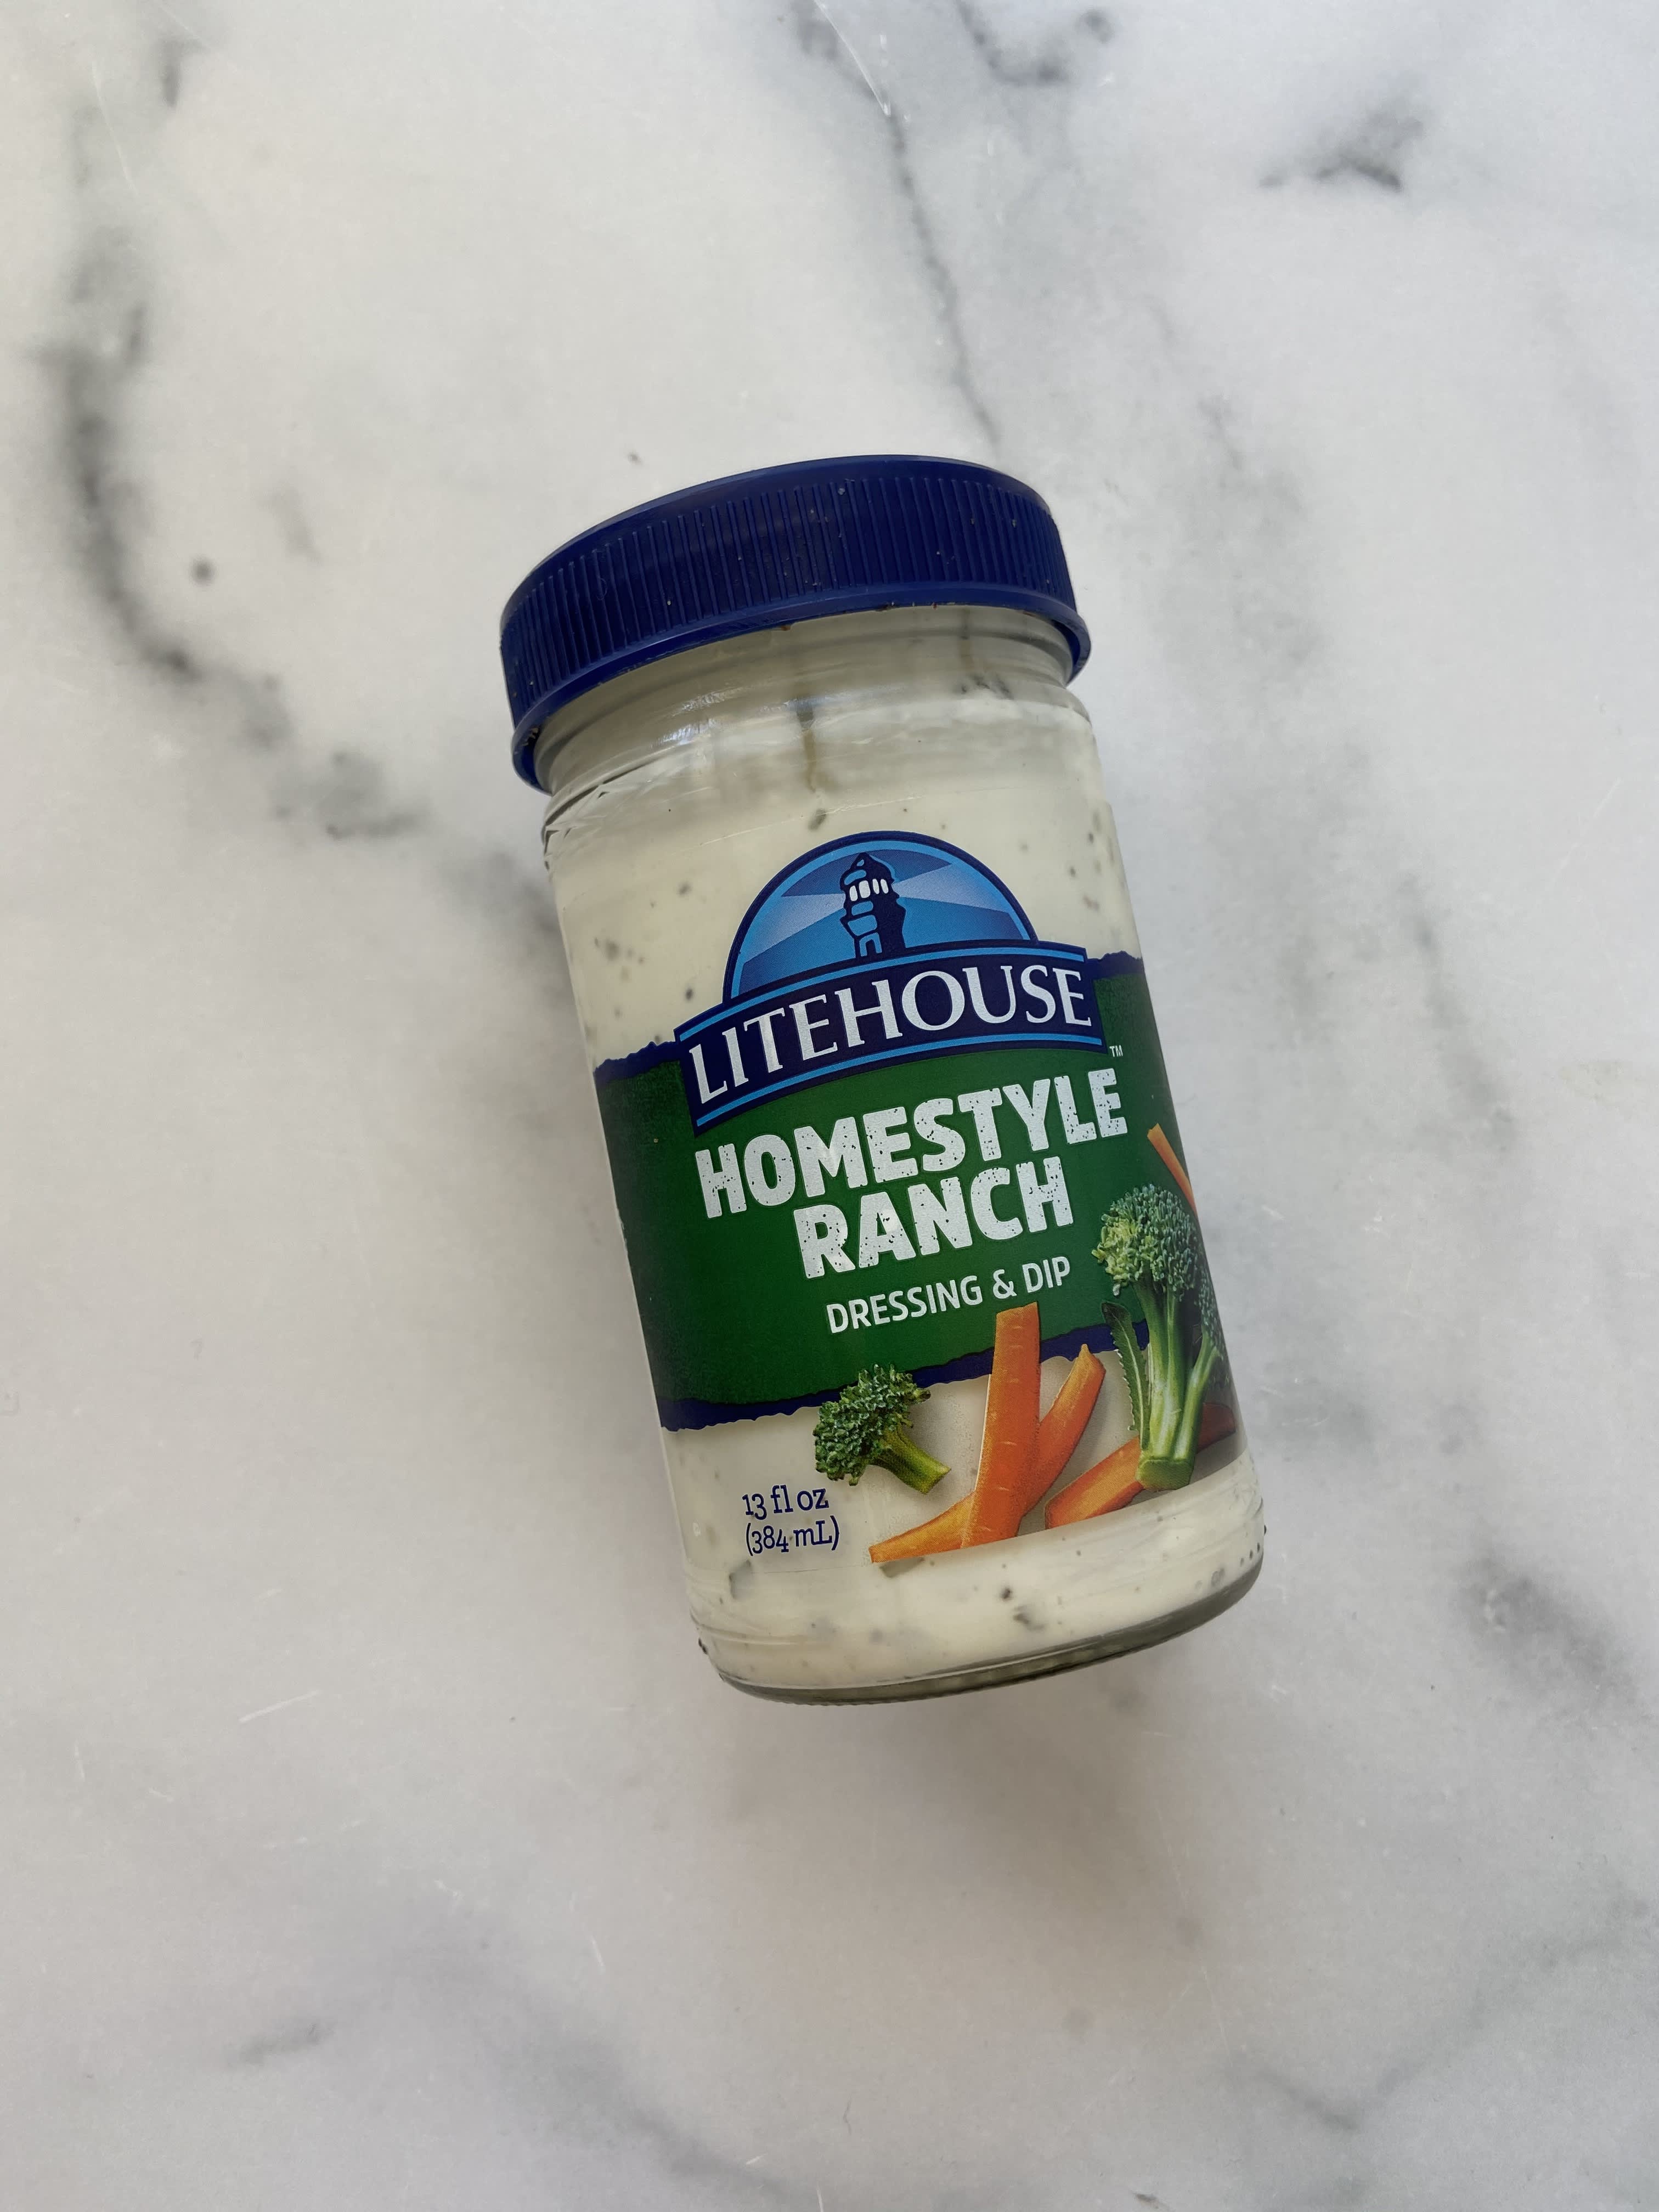 is classic gourmet ranch good?